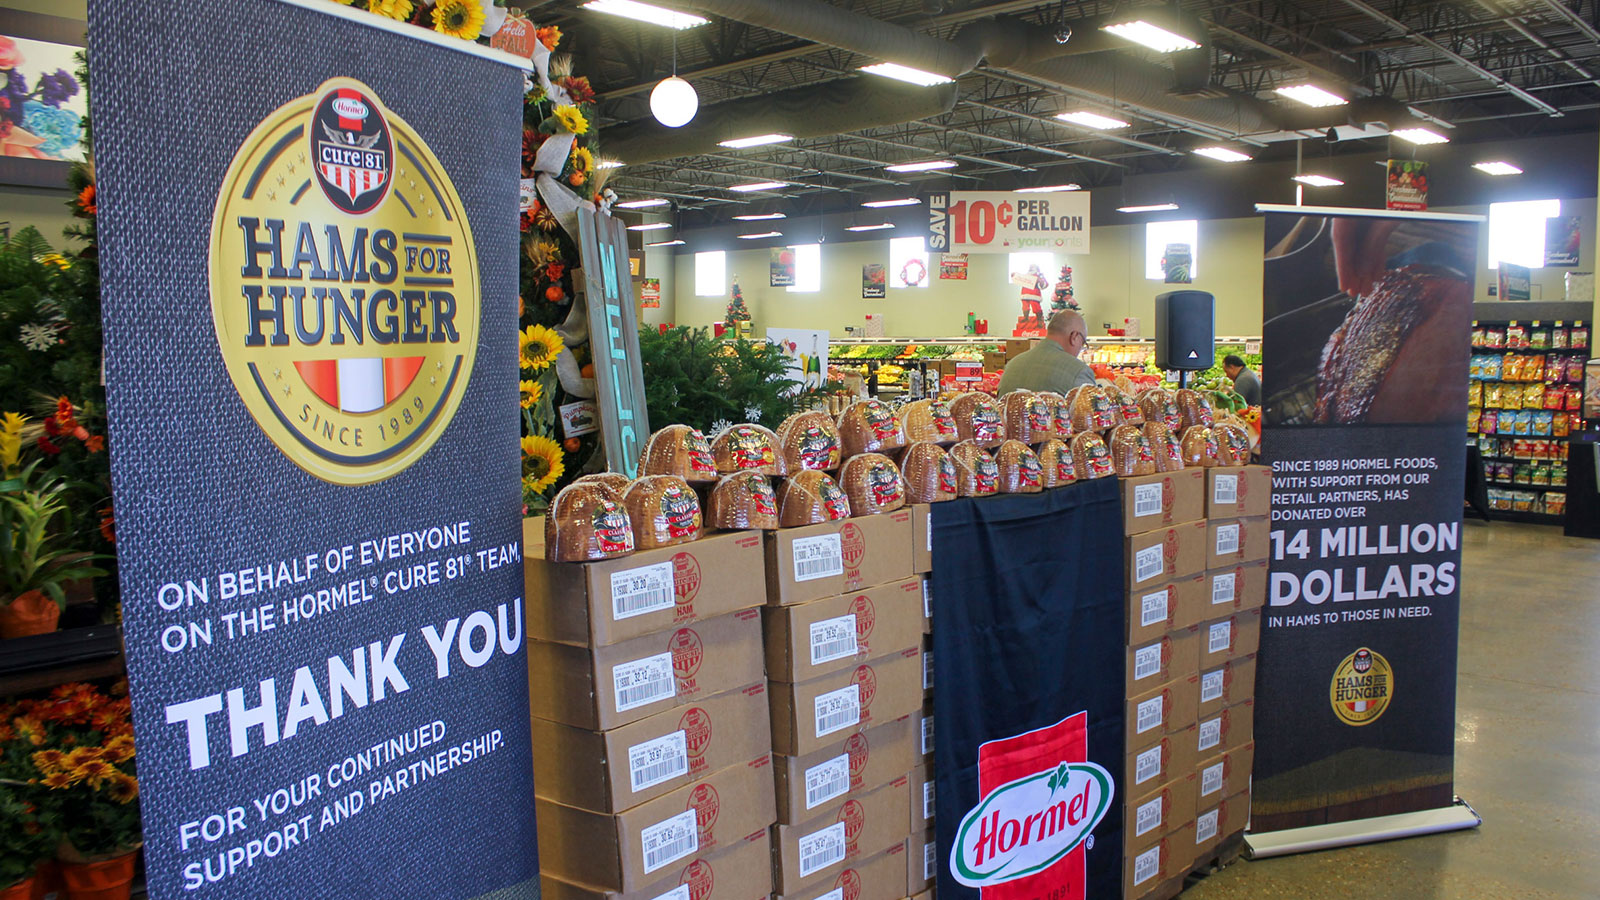 Hams For Hunger branded banner thanking consumers for participating